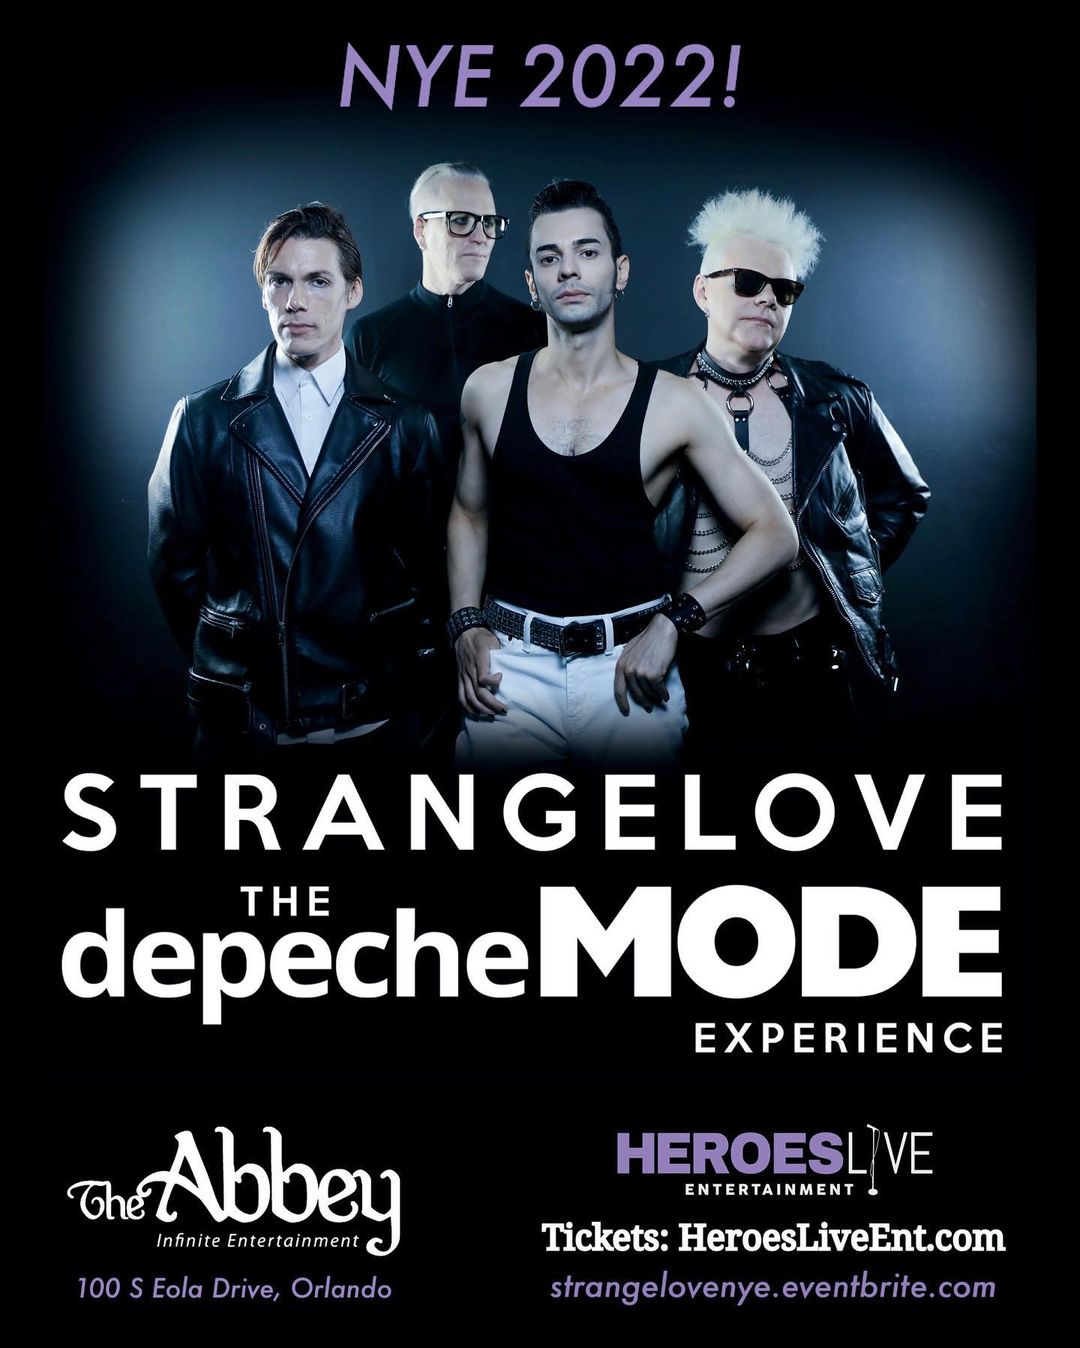 Depeche Mode celebrate the endurance of life and music at the